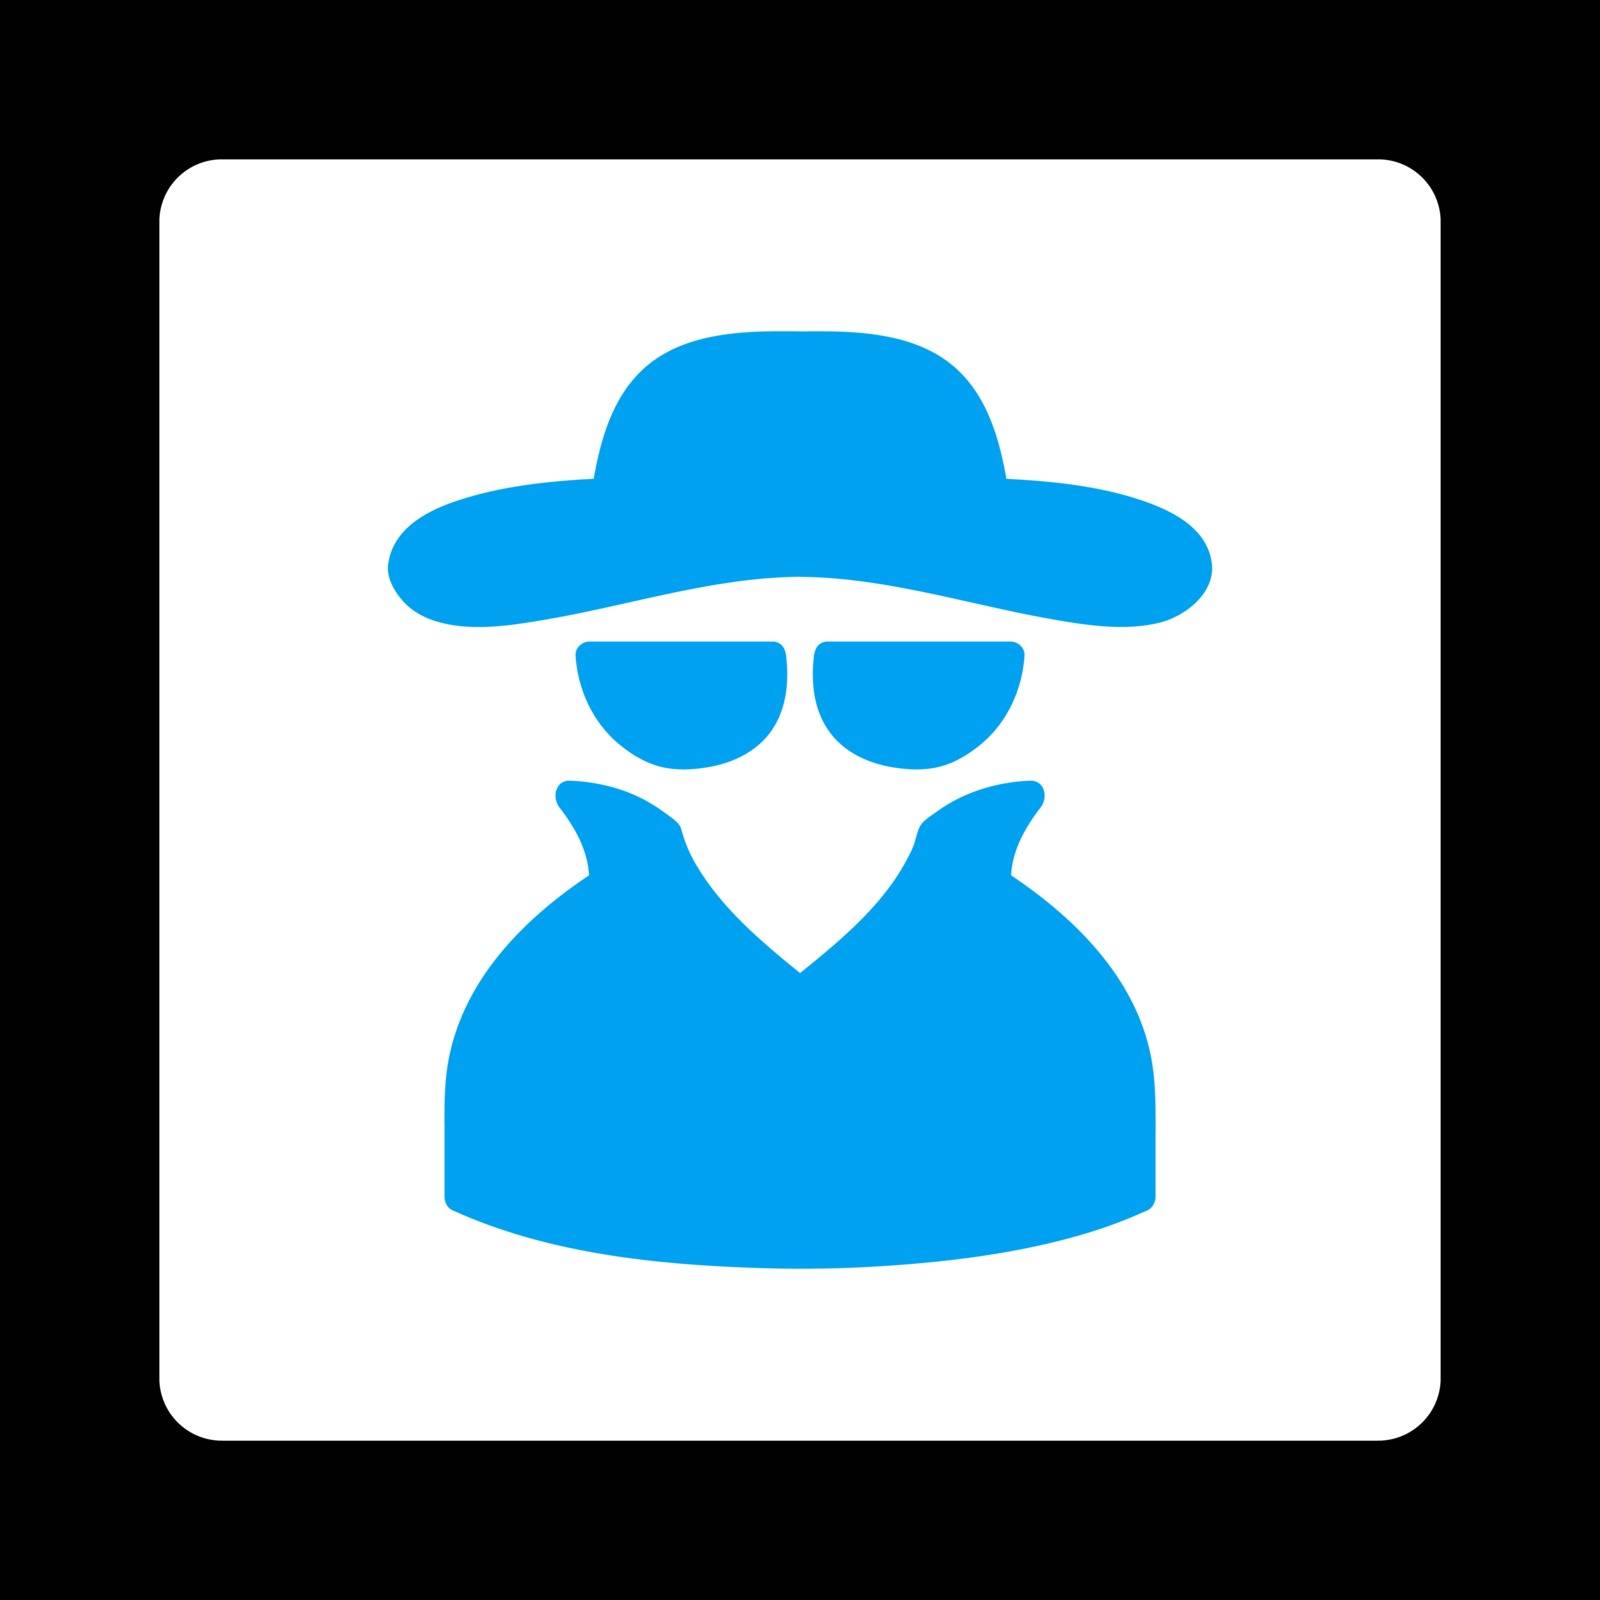 Spy icon. Vector style is blue and white colors, flat rounded square button on a black background.